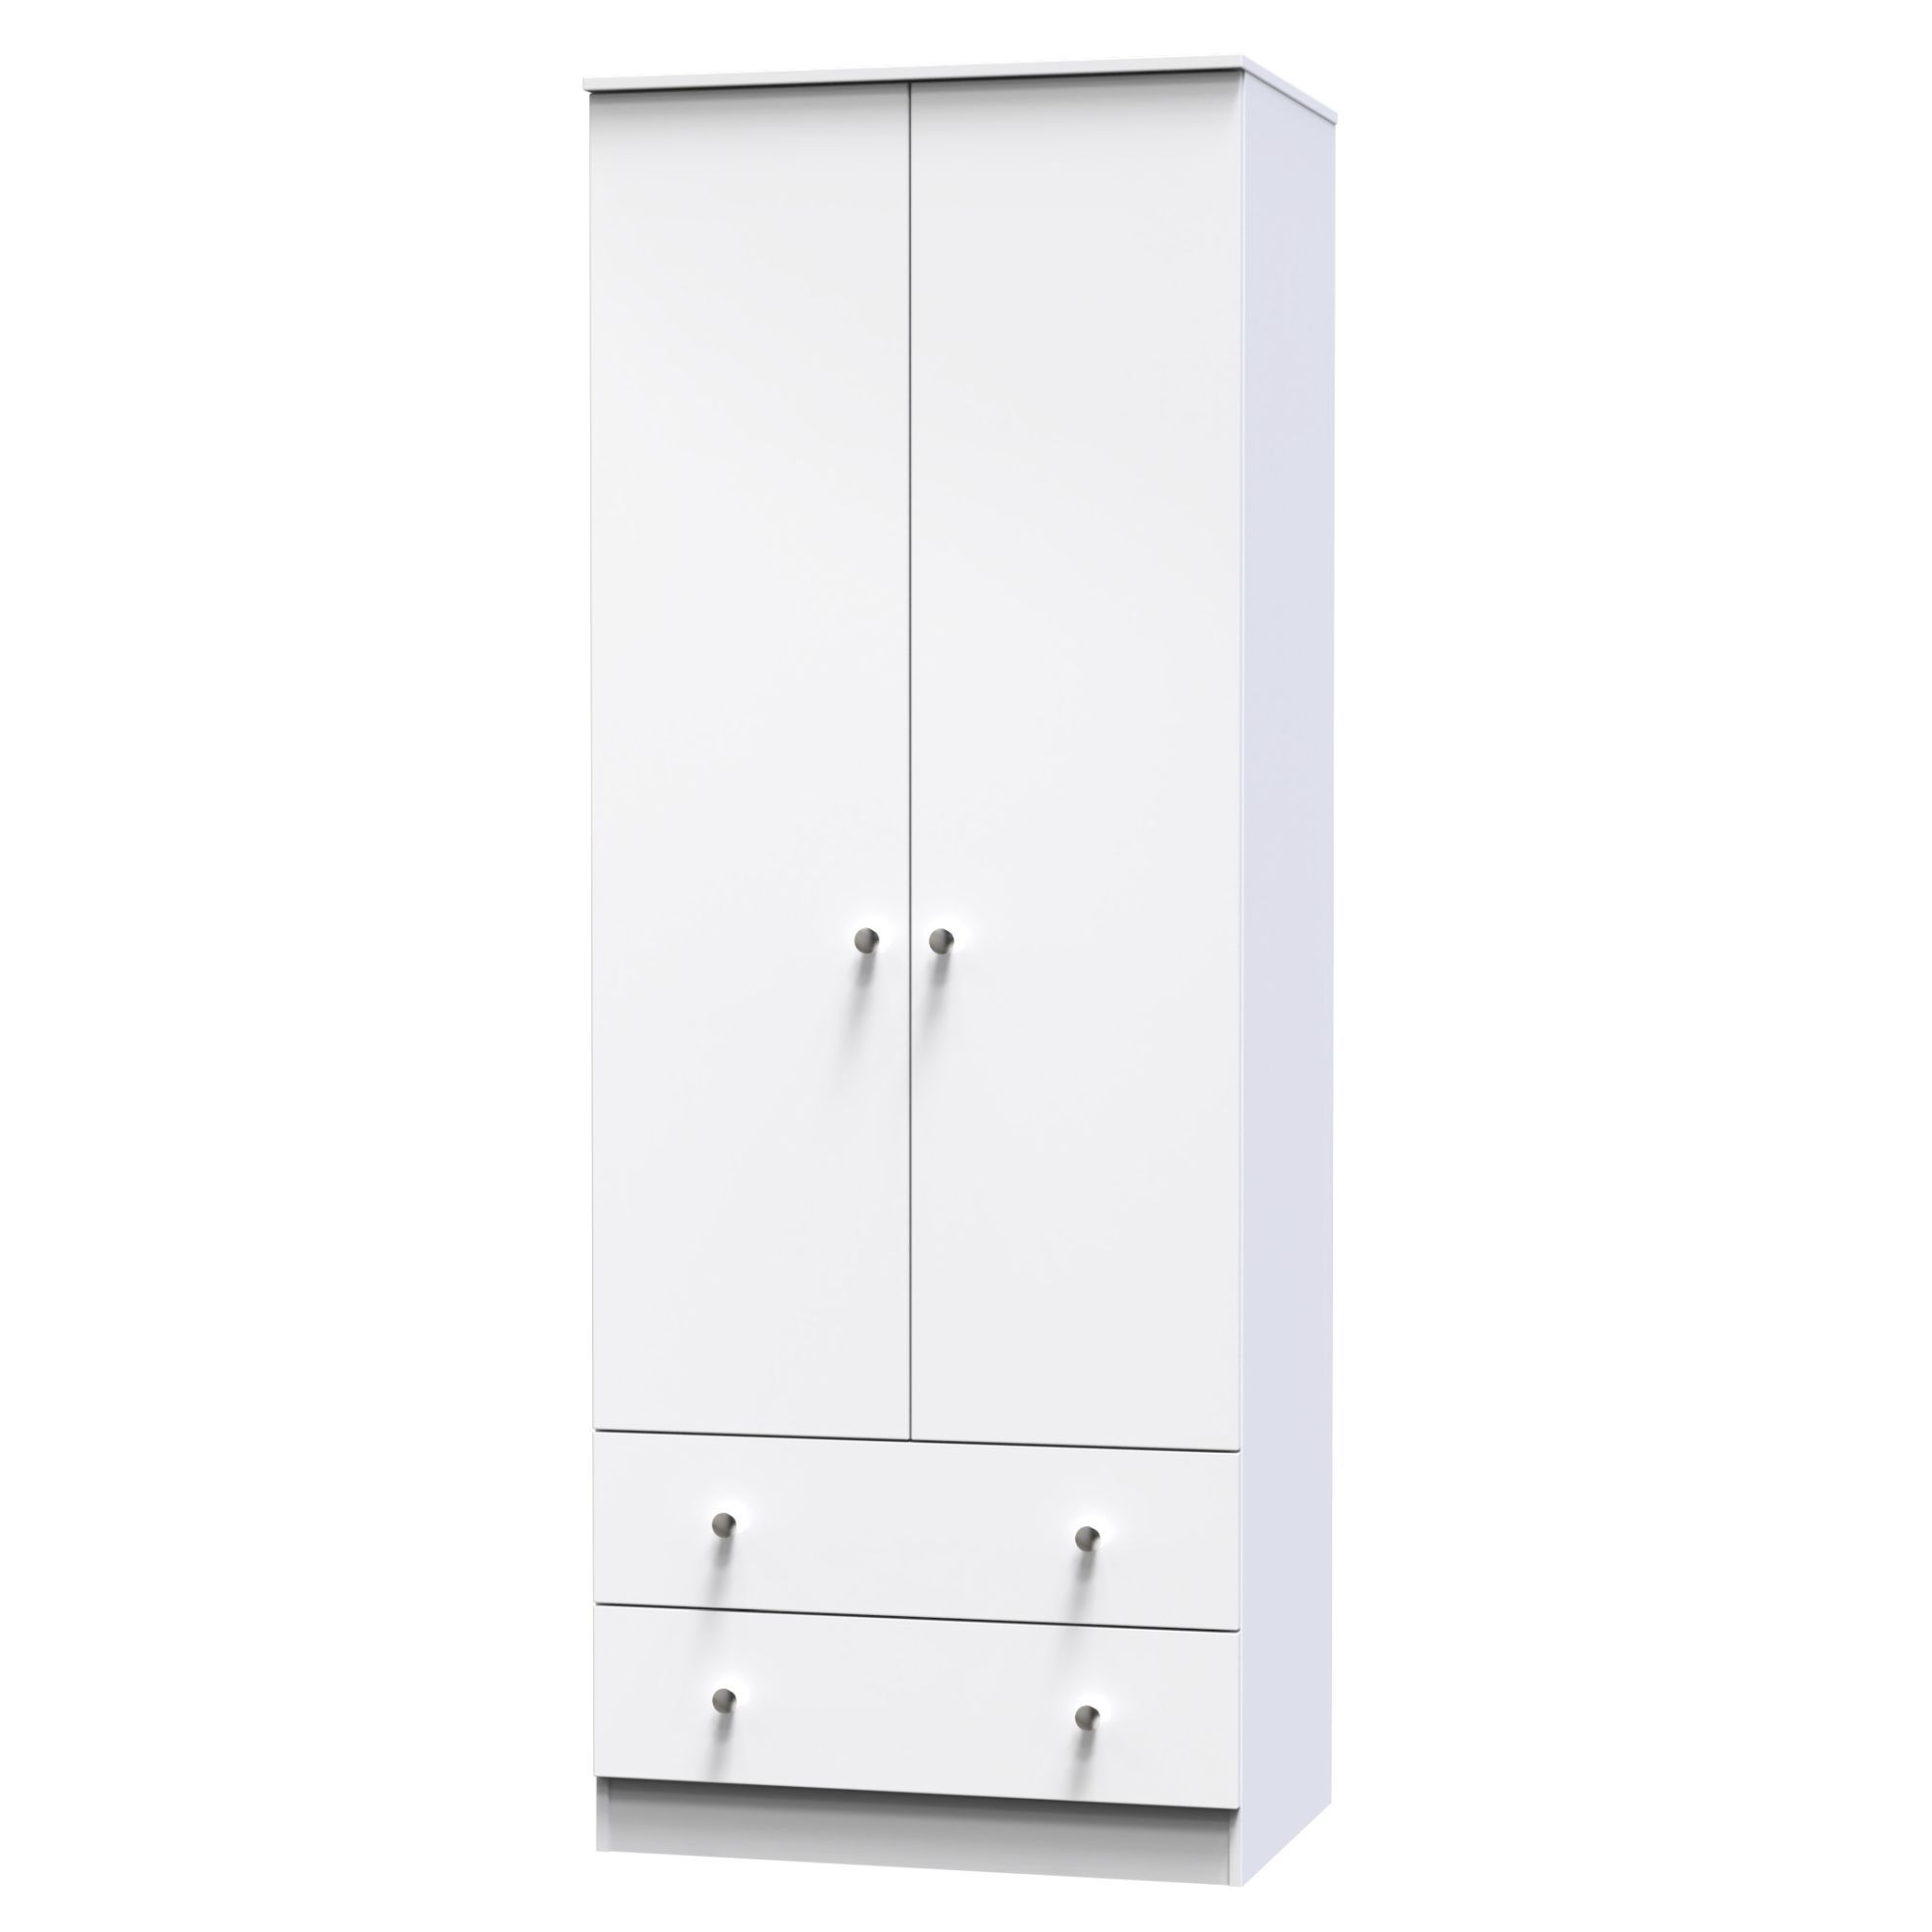 Yarmouth Ready assembled Modern White 2 Drawer Tall Double Wardrobe (H)1960mm (W)740mm (D)520mm